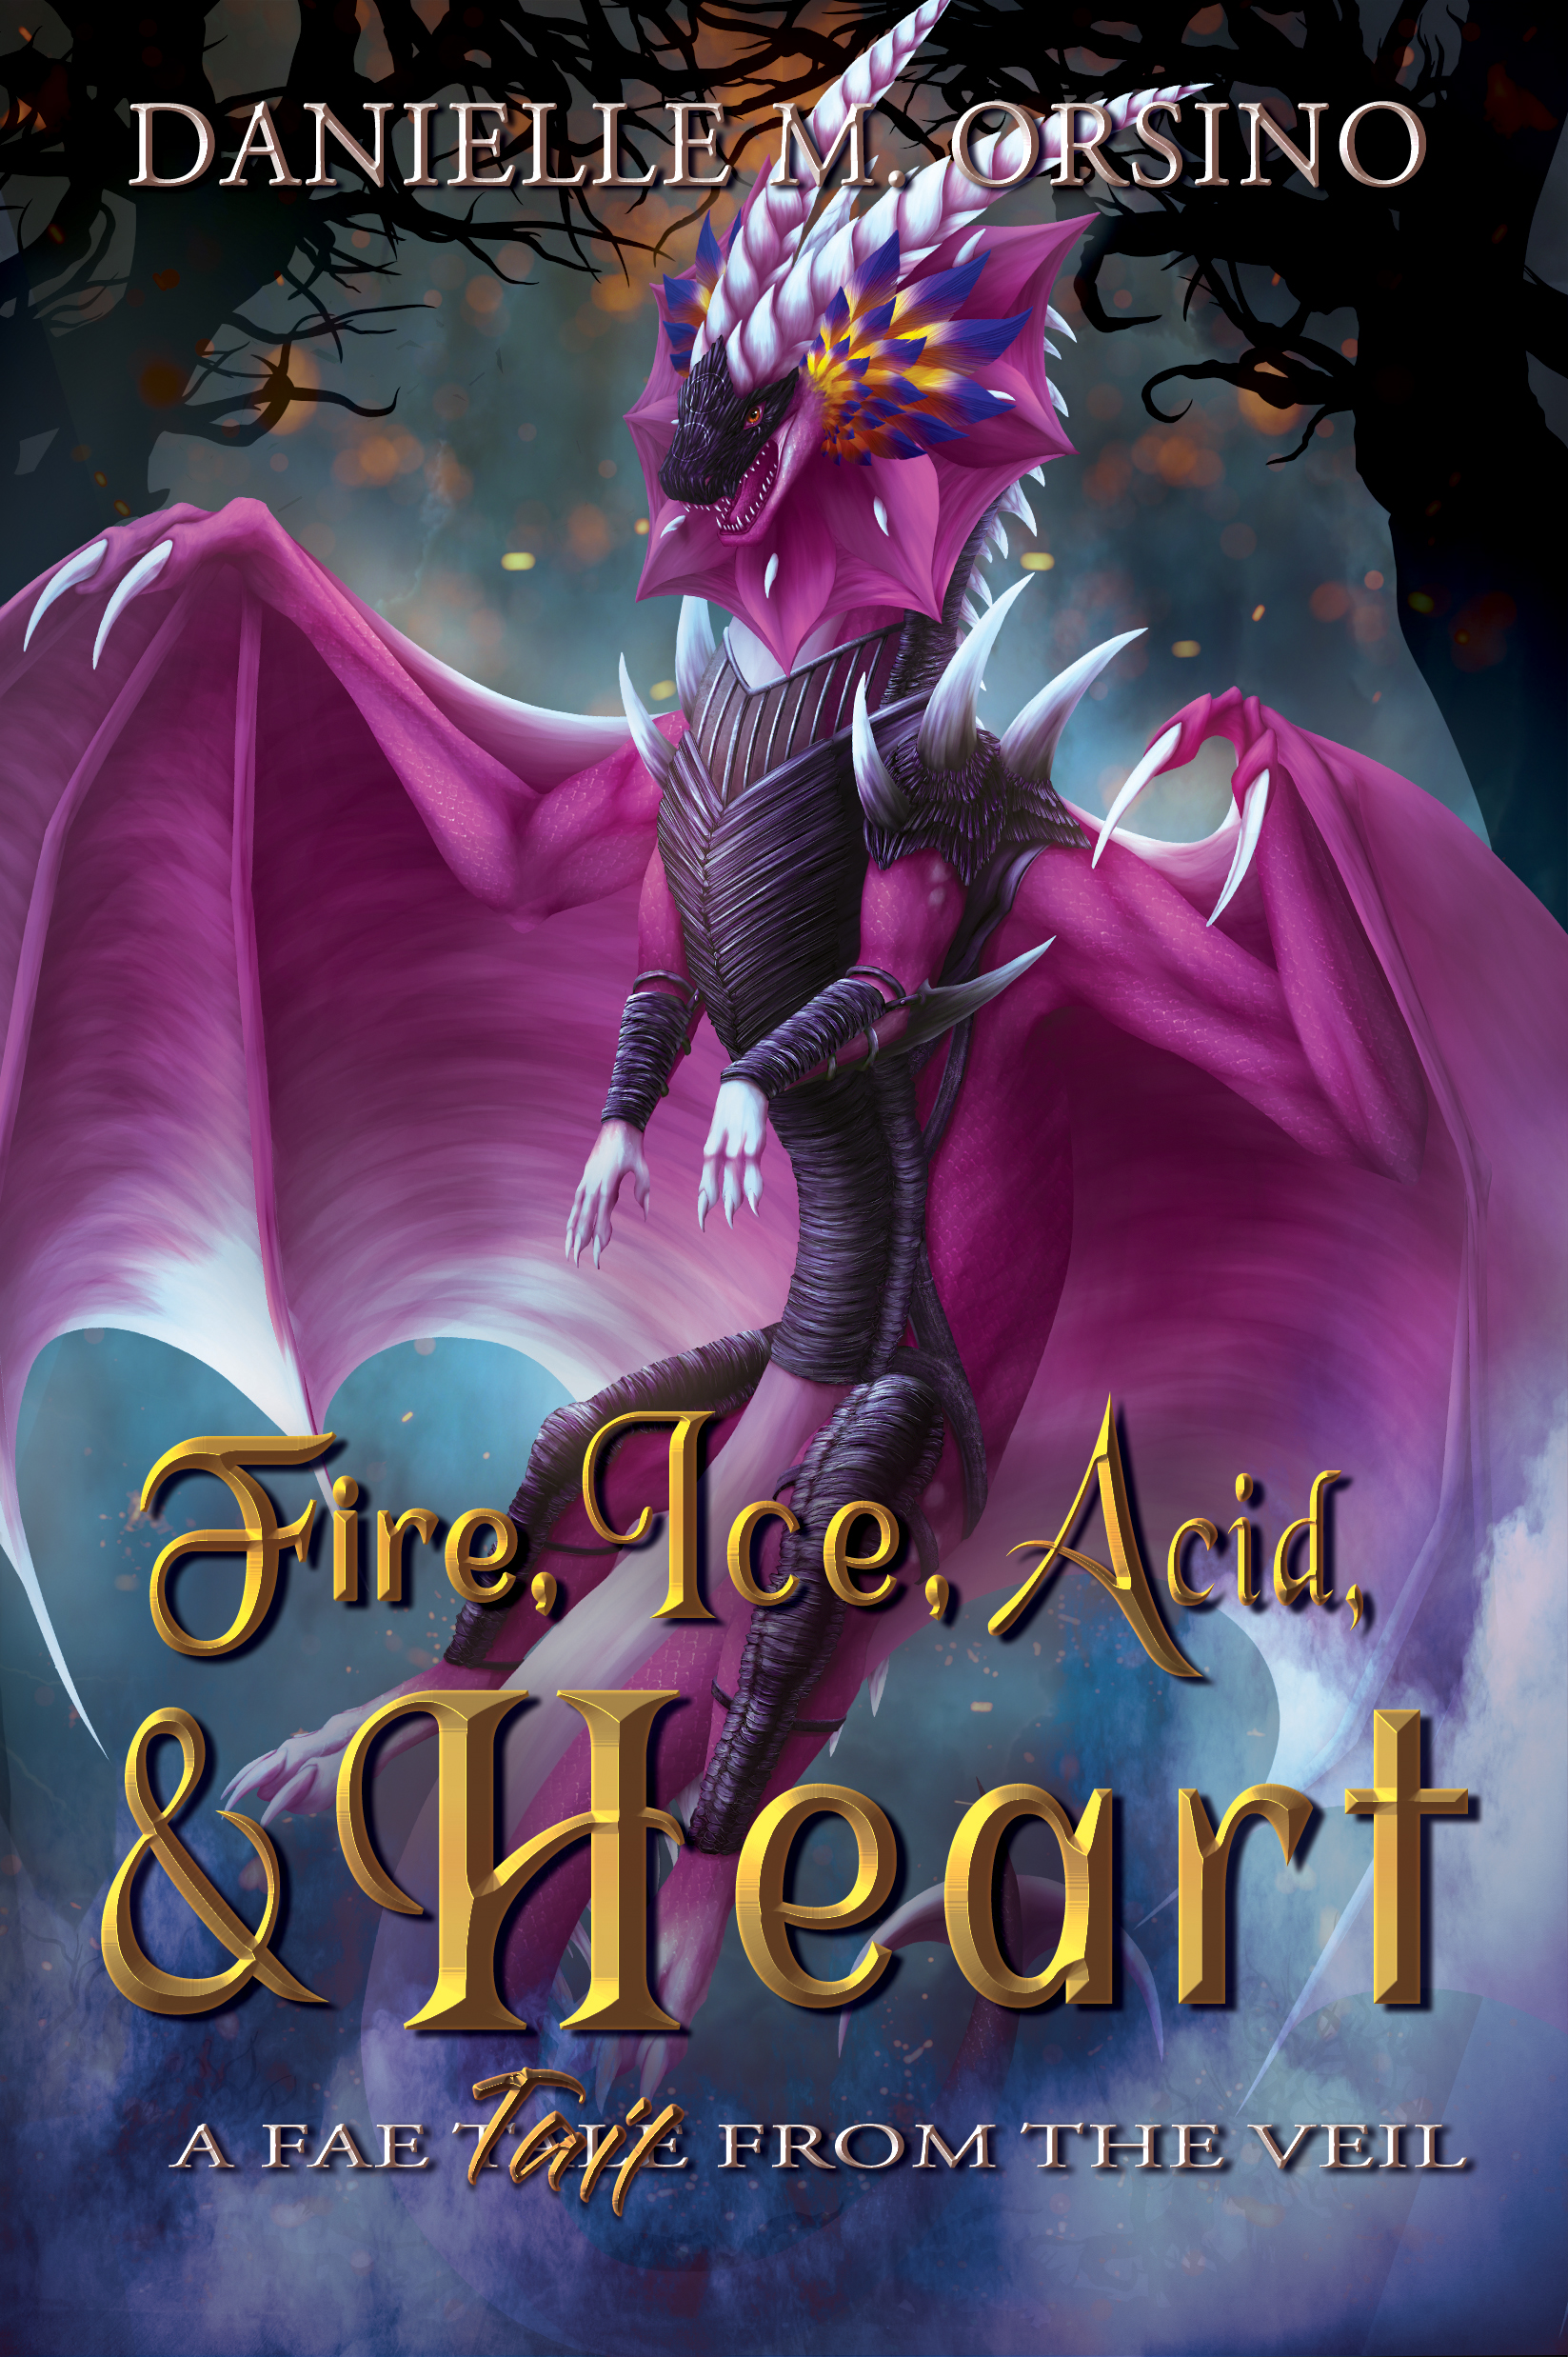 Spotlight on Fire, Ice, Acid & Heart (Danielle M. Orsino), Excerpt Plus Giveaway! ~US Only